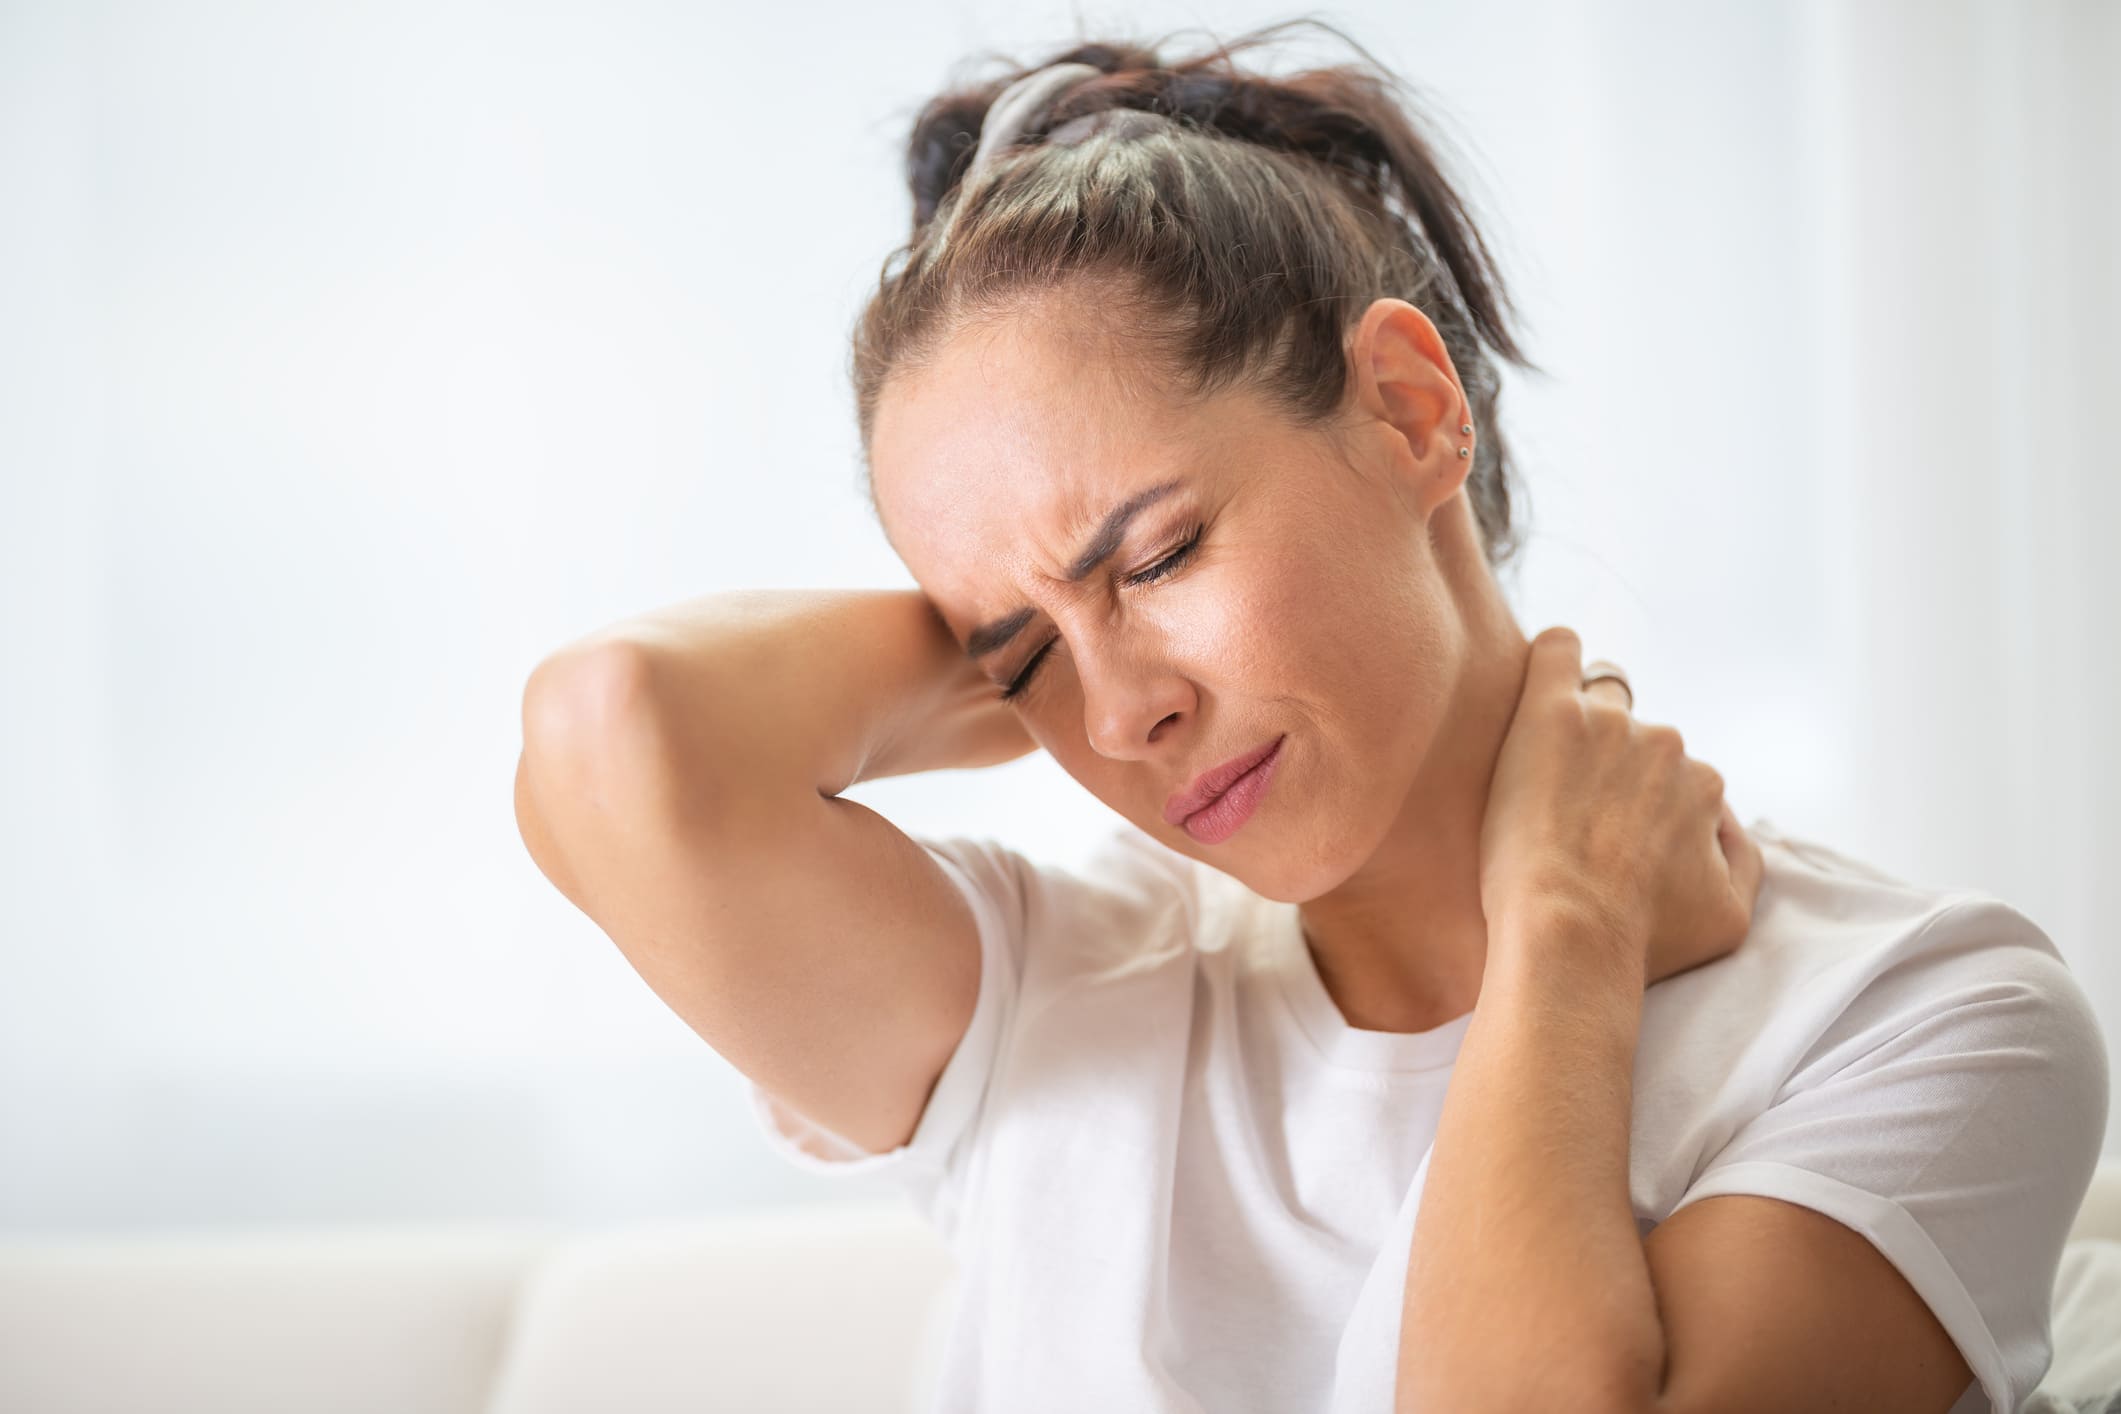 Woman With Ongoing Neck Pain After An Accident